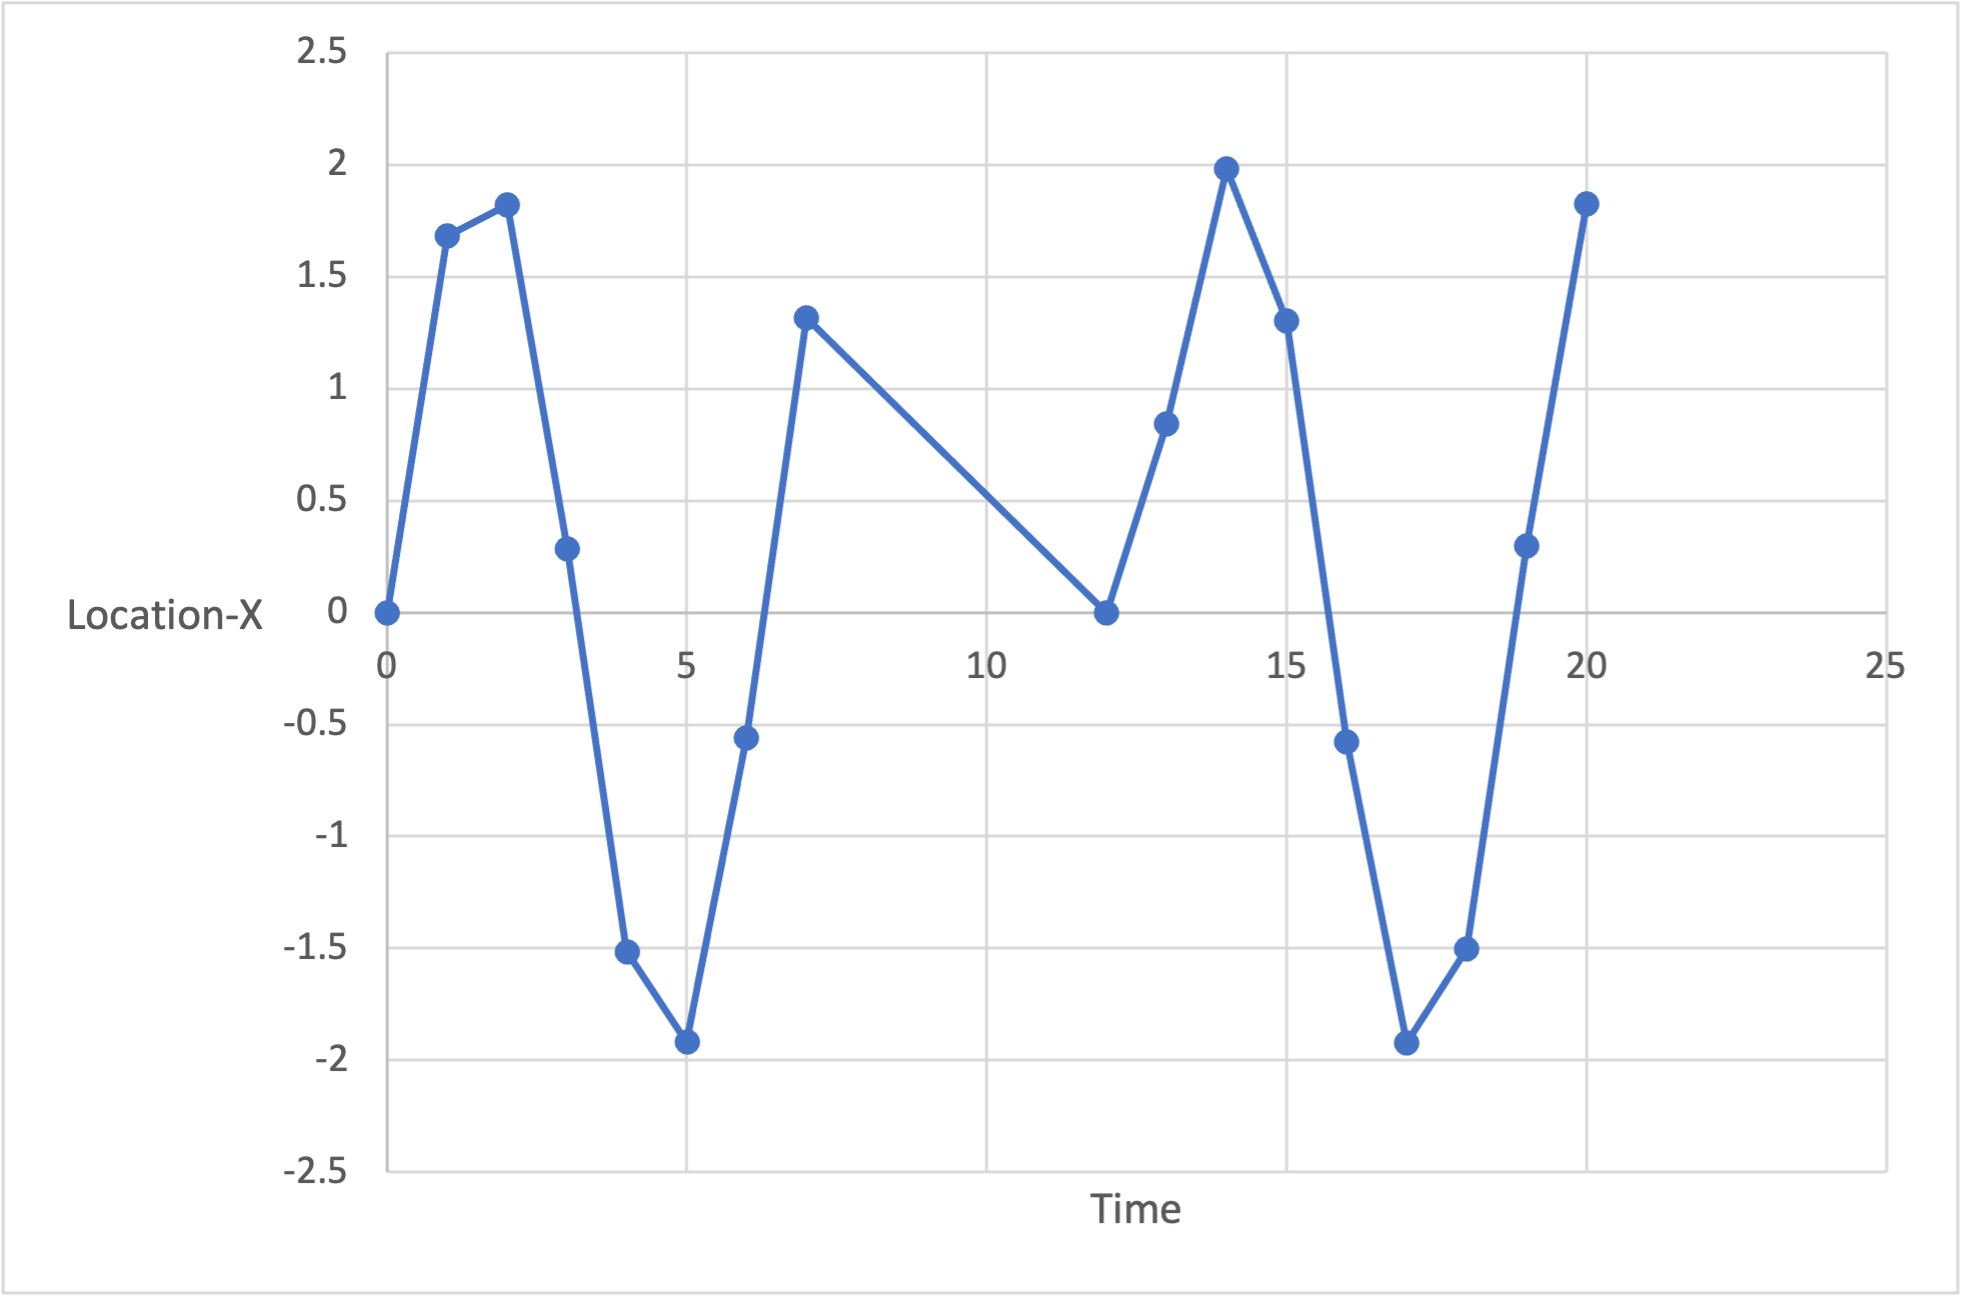 Graph of Location-X coordinates plotted against time.